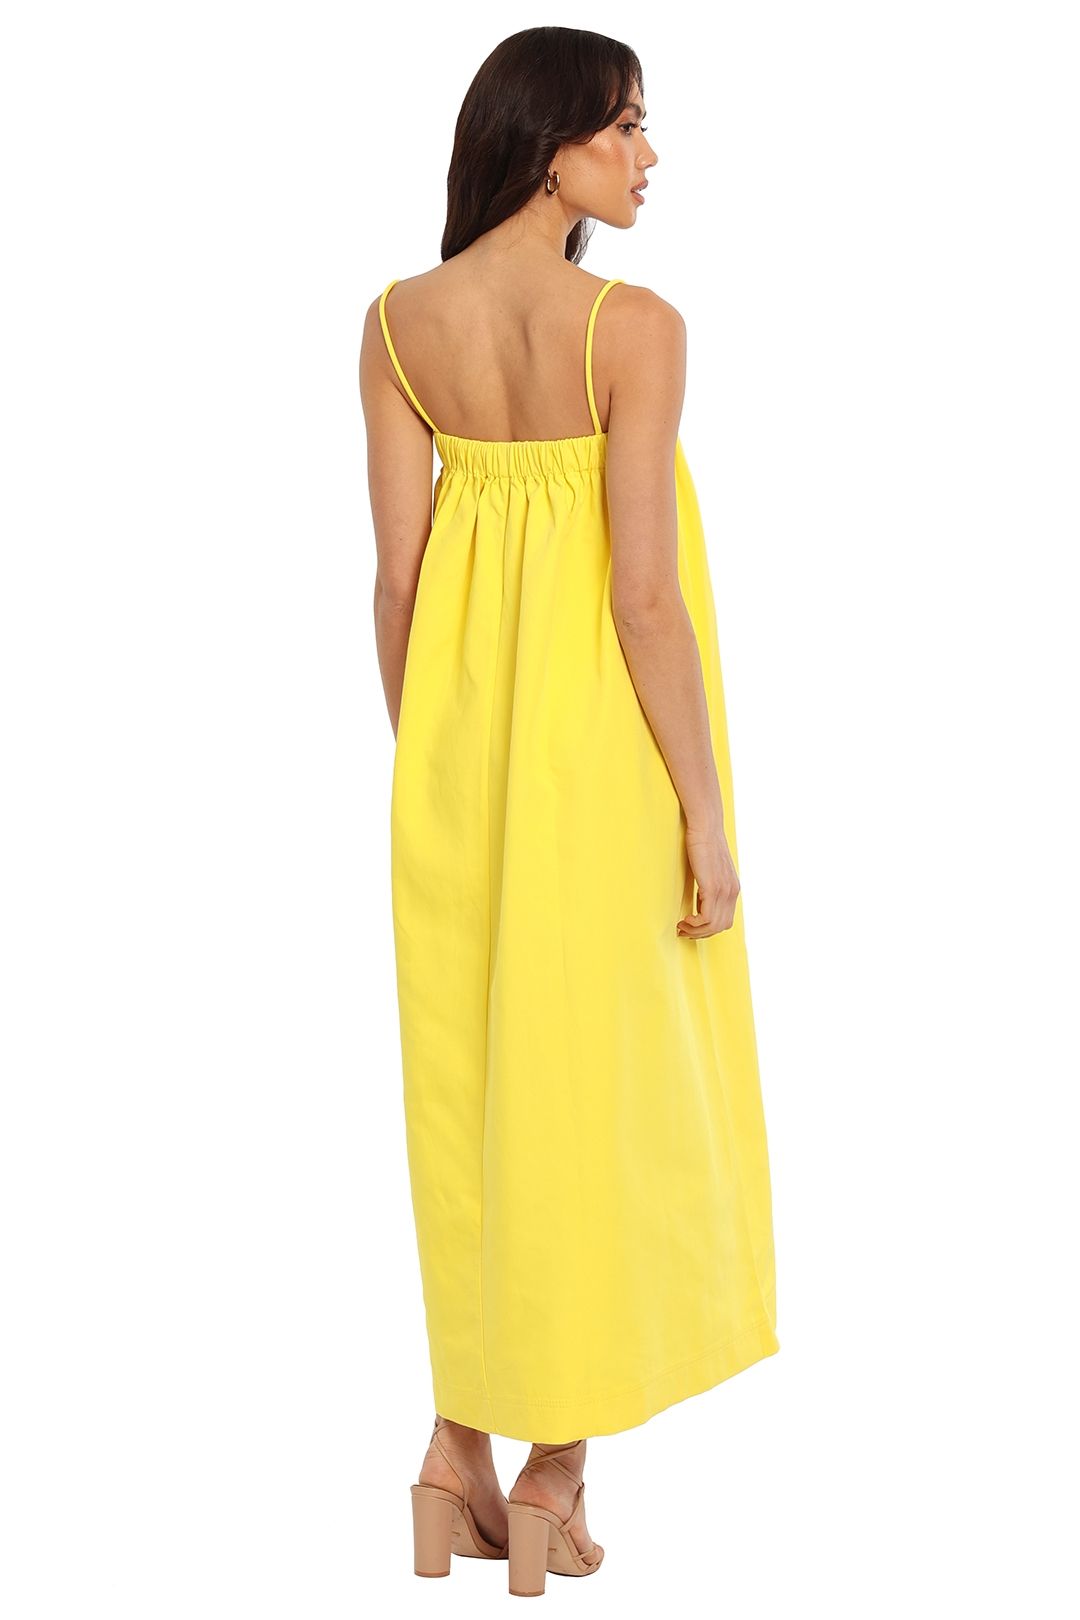 By Johnny Becca Maxi Relaxed fit